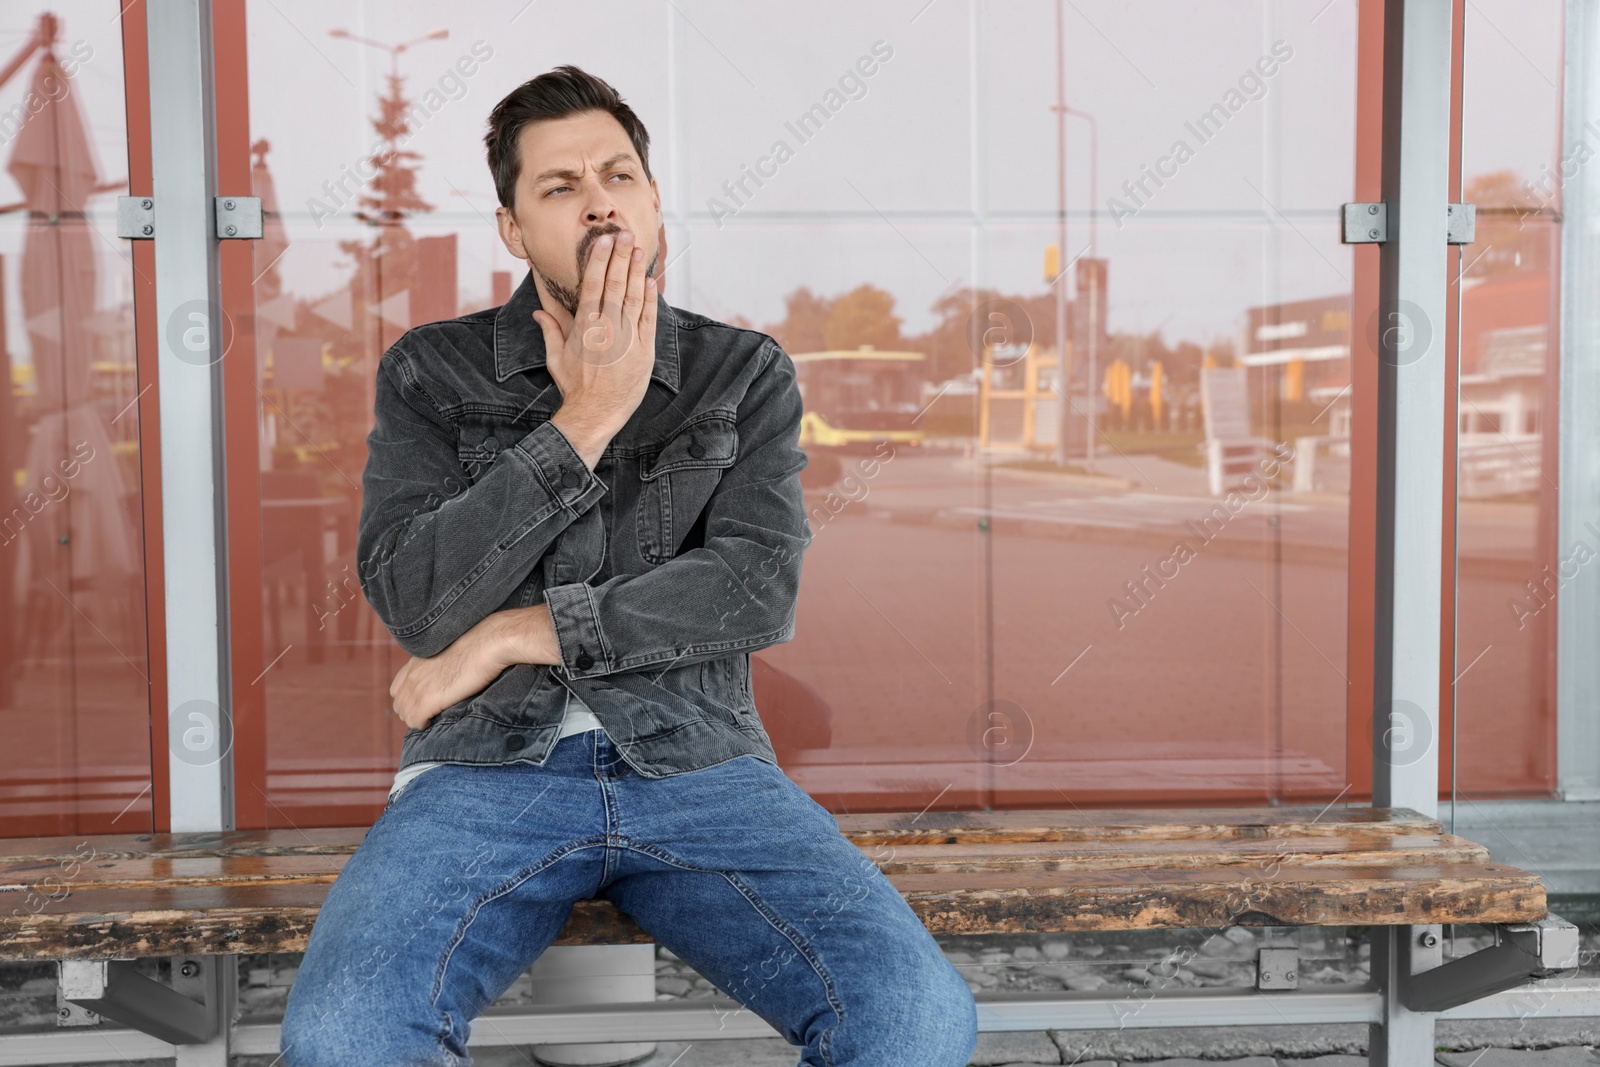 Photo of Sleepy man yawning at public transport stop outdoors. Space for text